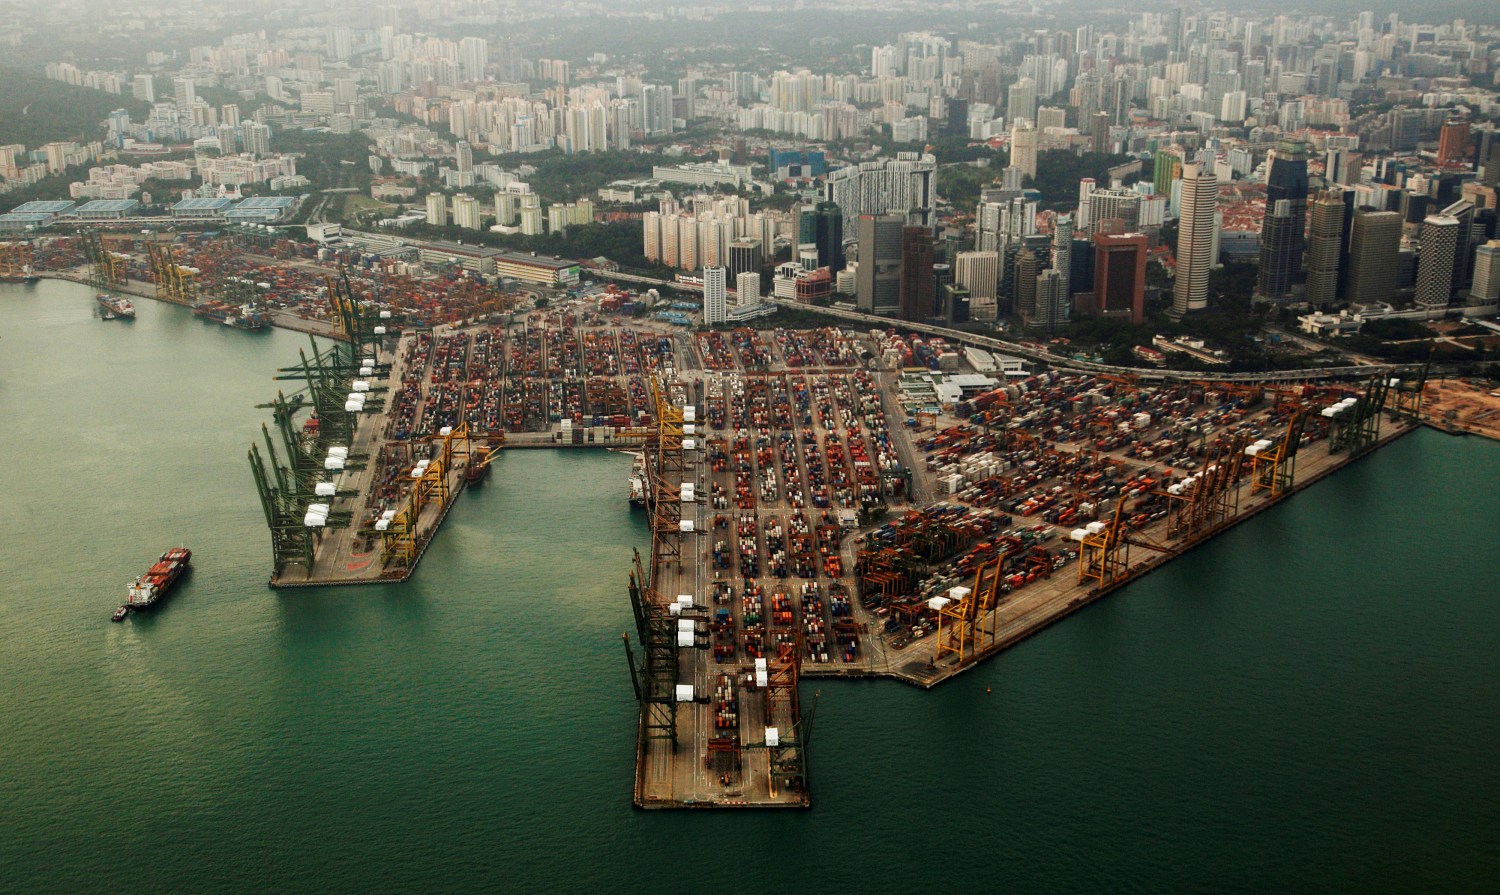 An aerial view of shipping containers stacked at the port of Singapore February 14, 2012. REUTERS/Edgar Su/File Photo                   GLOBAL BUSINESS WEEK AHEAD PACKAGE       SEARCH BUSINESS WEEK AHEAD 12 DEC FOR ALL IMAGES